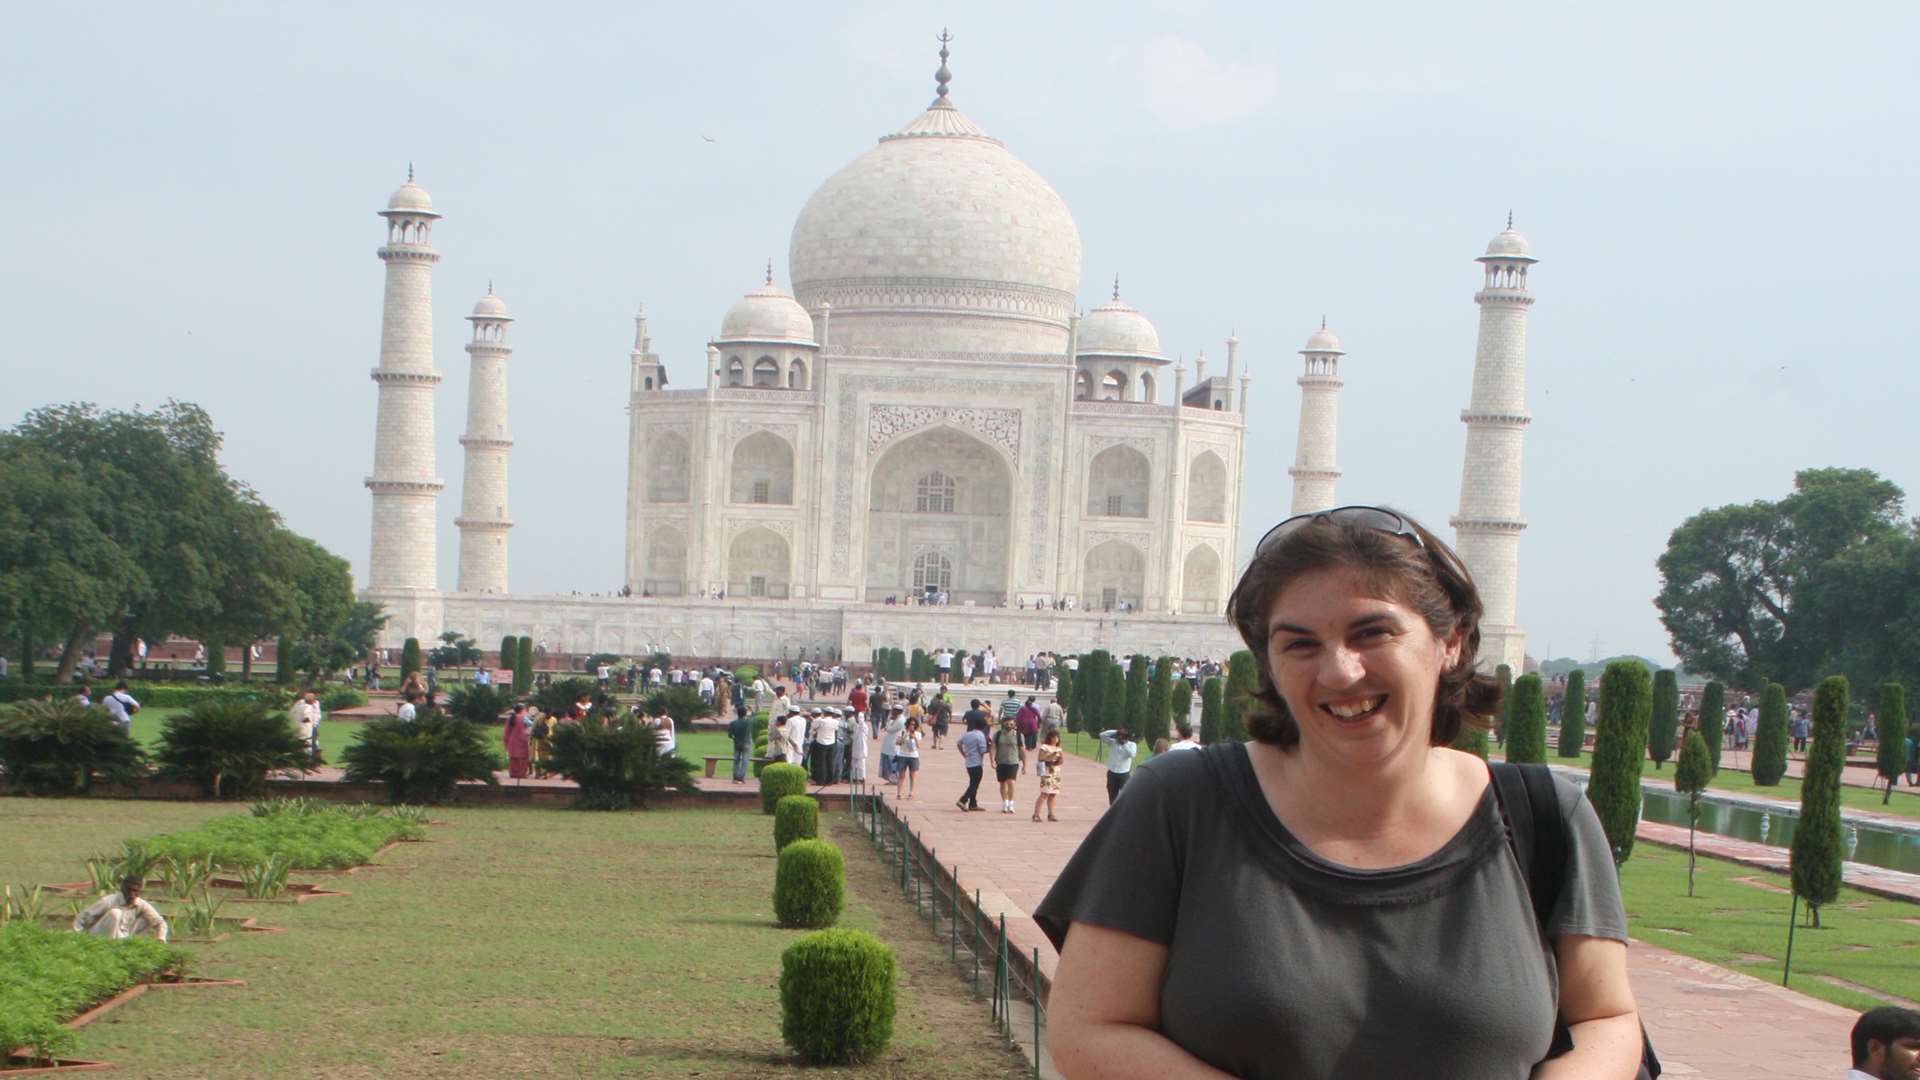 Claire Boxall visited the Taj Mahal on her year abroad